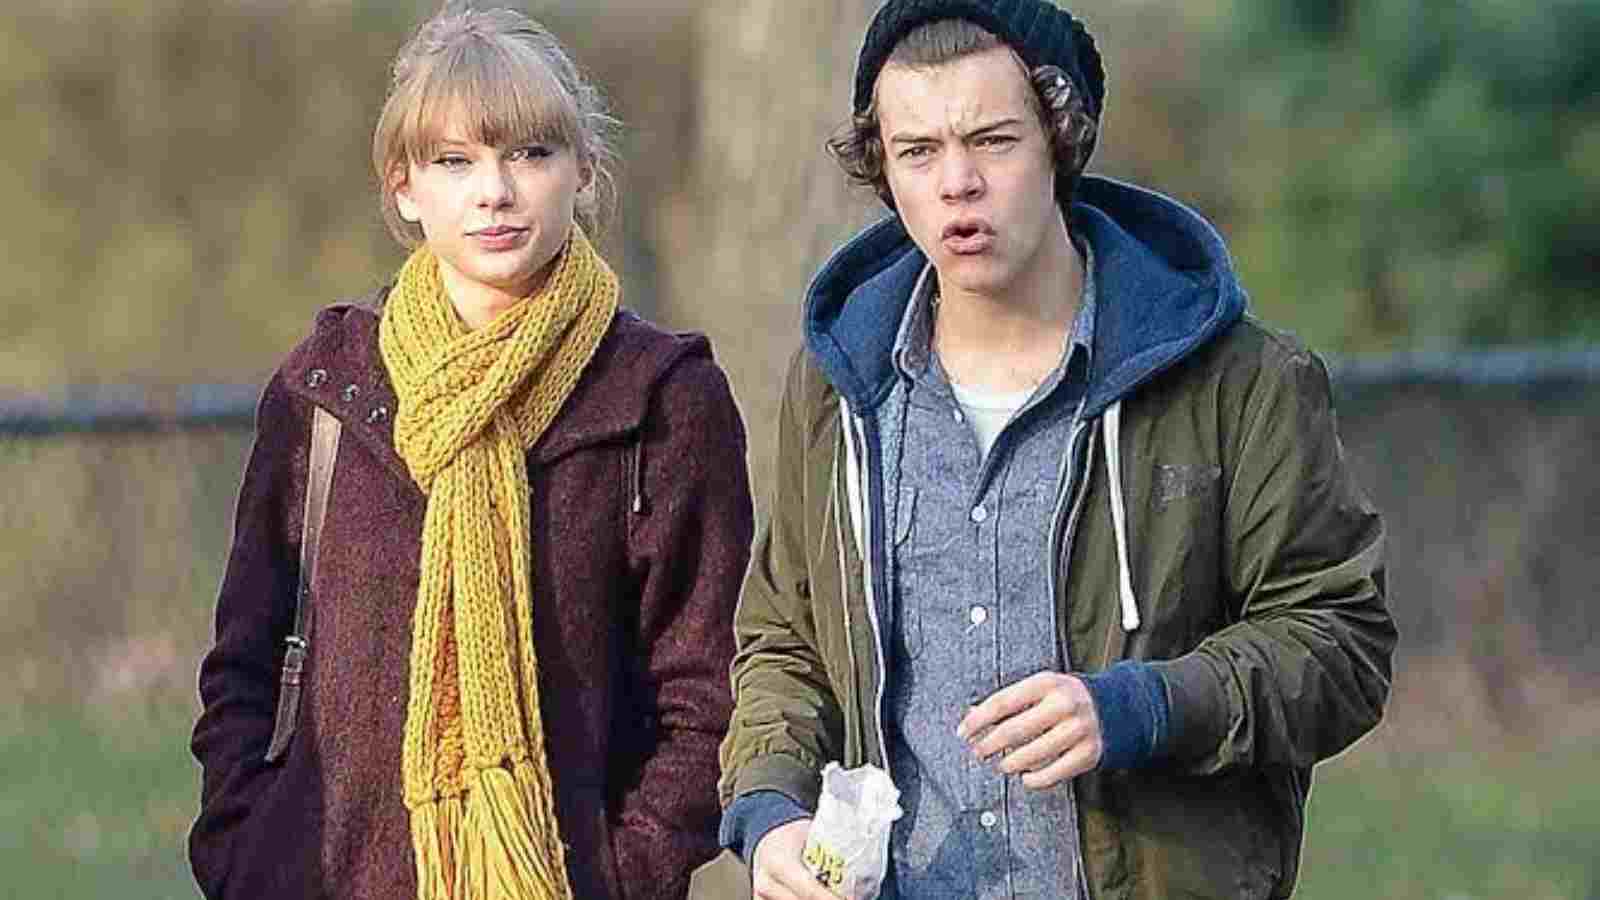 Who all did Harry Styles date apart from Taylor Swift?